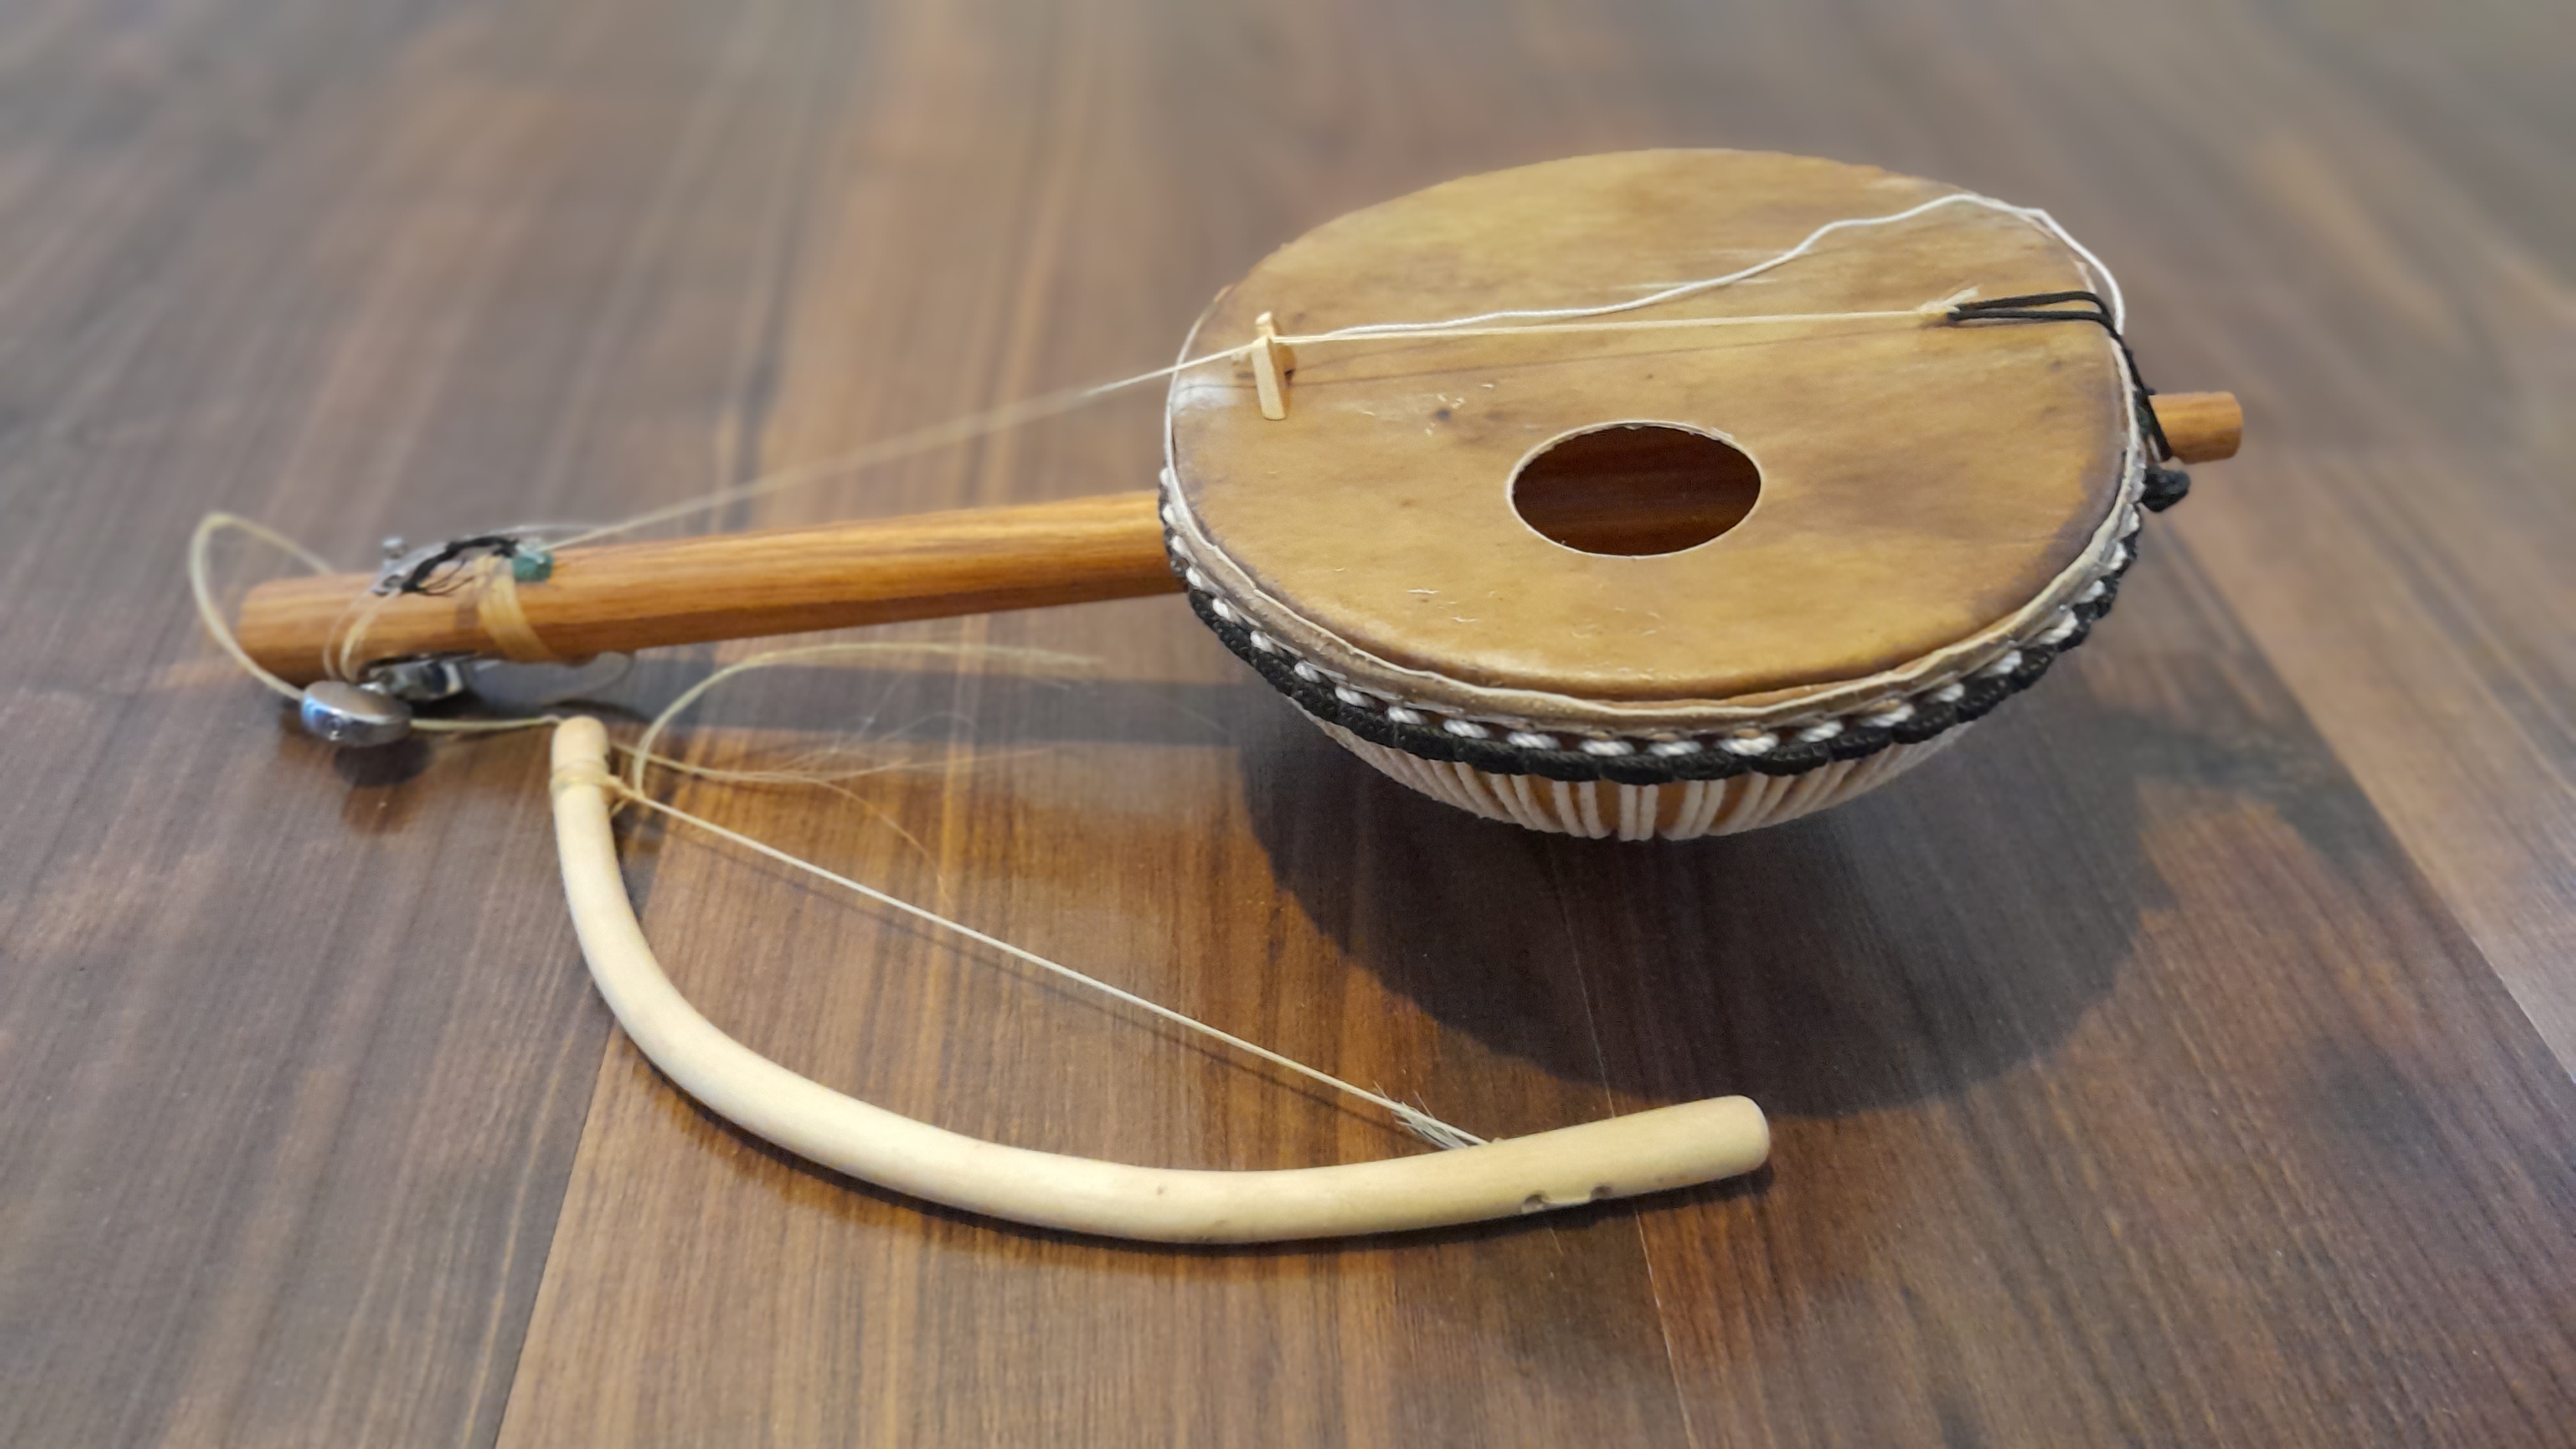 The sokou, a bowed West African instrument